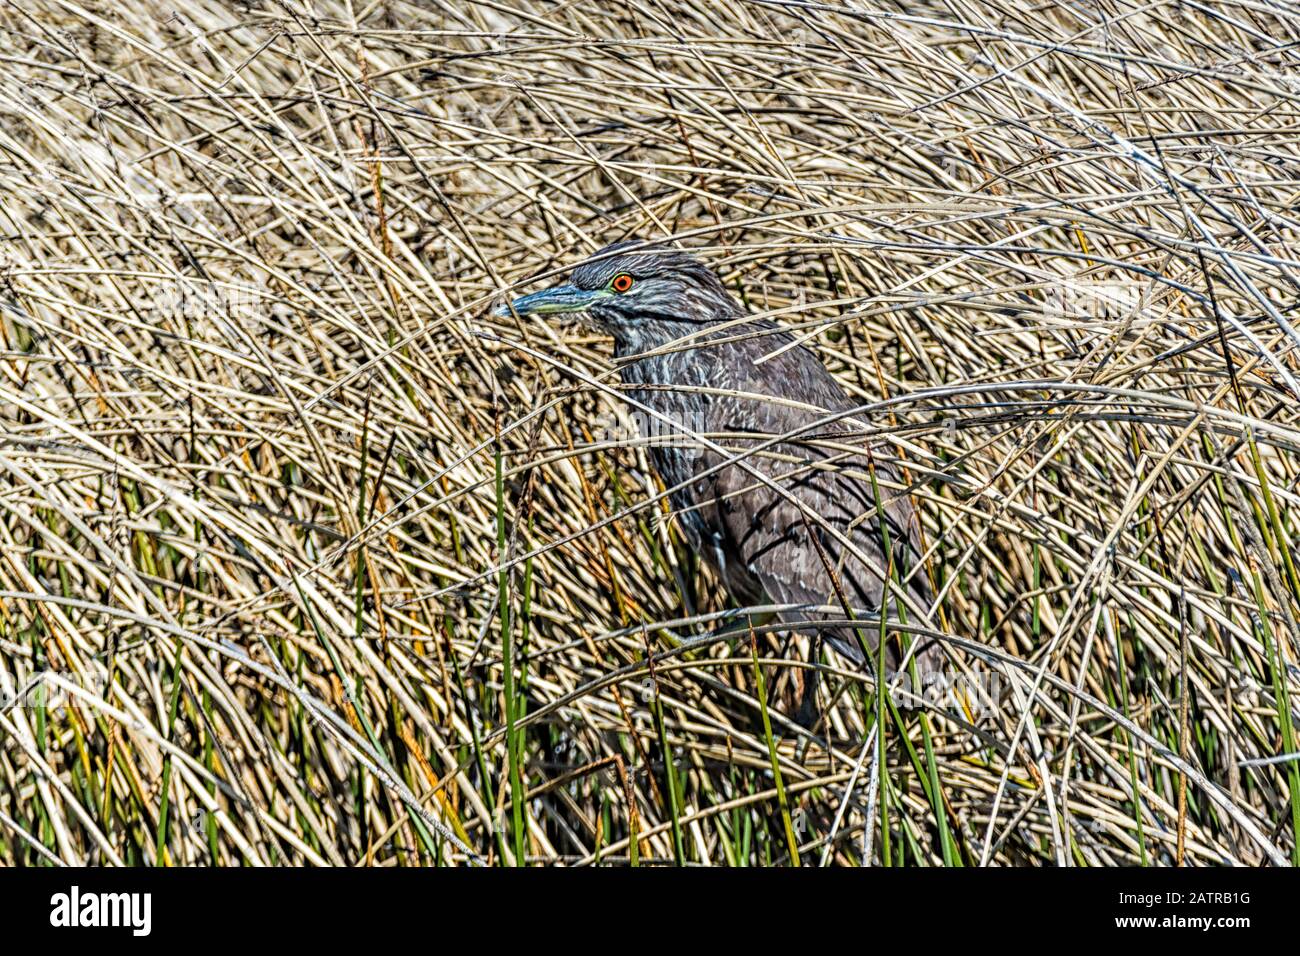 Black-crowned Night Heron, Nycticorax nycticorax cyanocephalus, hidden in reeds at Long Pond on Sea Lion Island, Falkland Islands, South Atlantic Stock Photo